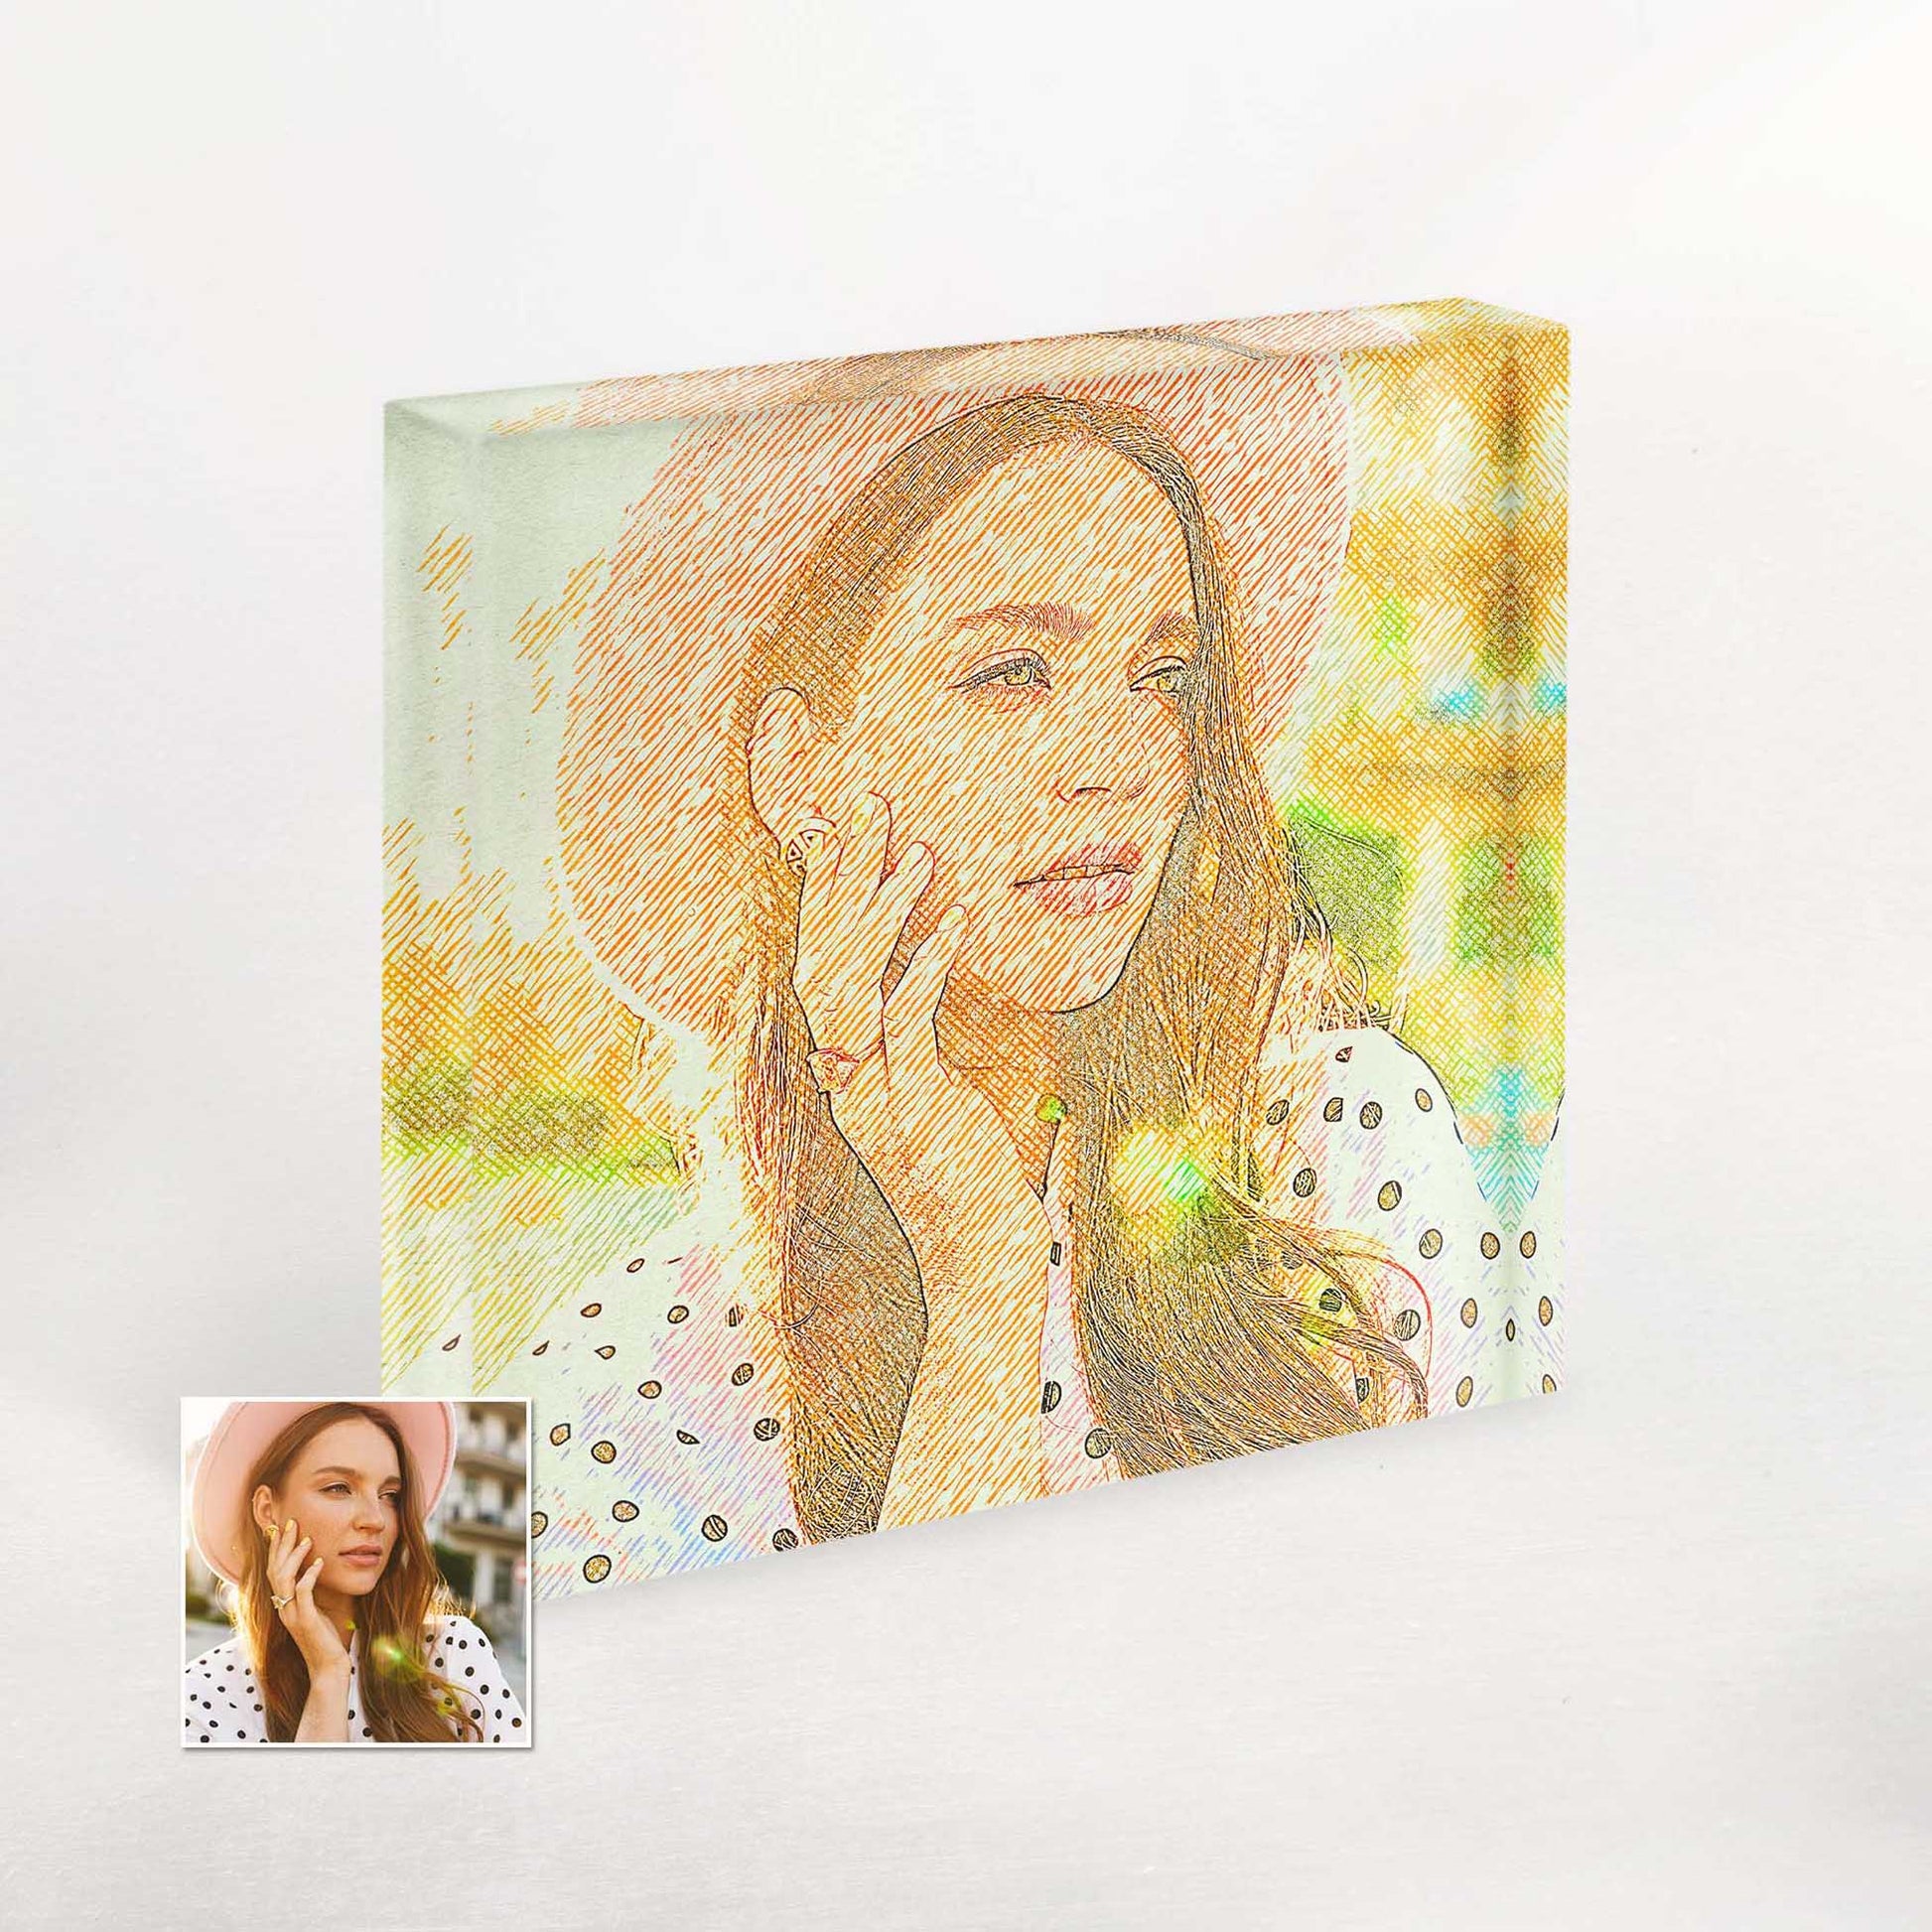 Personalise your space with our Drawing Crosshatch Acrylic Block Photo. Its unique design combines a natural and boho aesthetic, bringing a hip and happy vibe to your home decor. It's an excellent anniversary